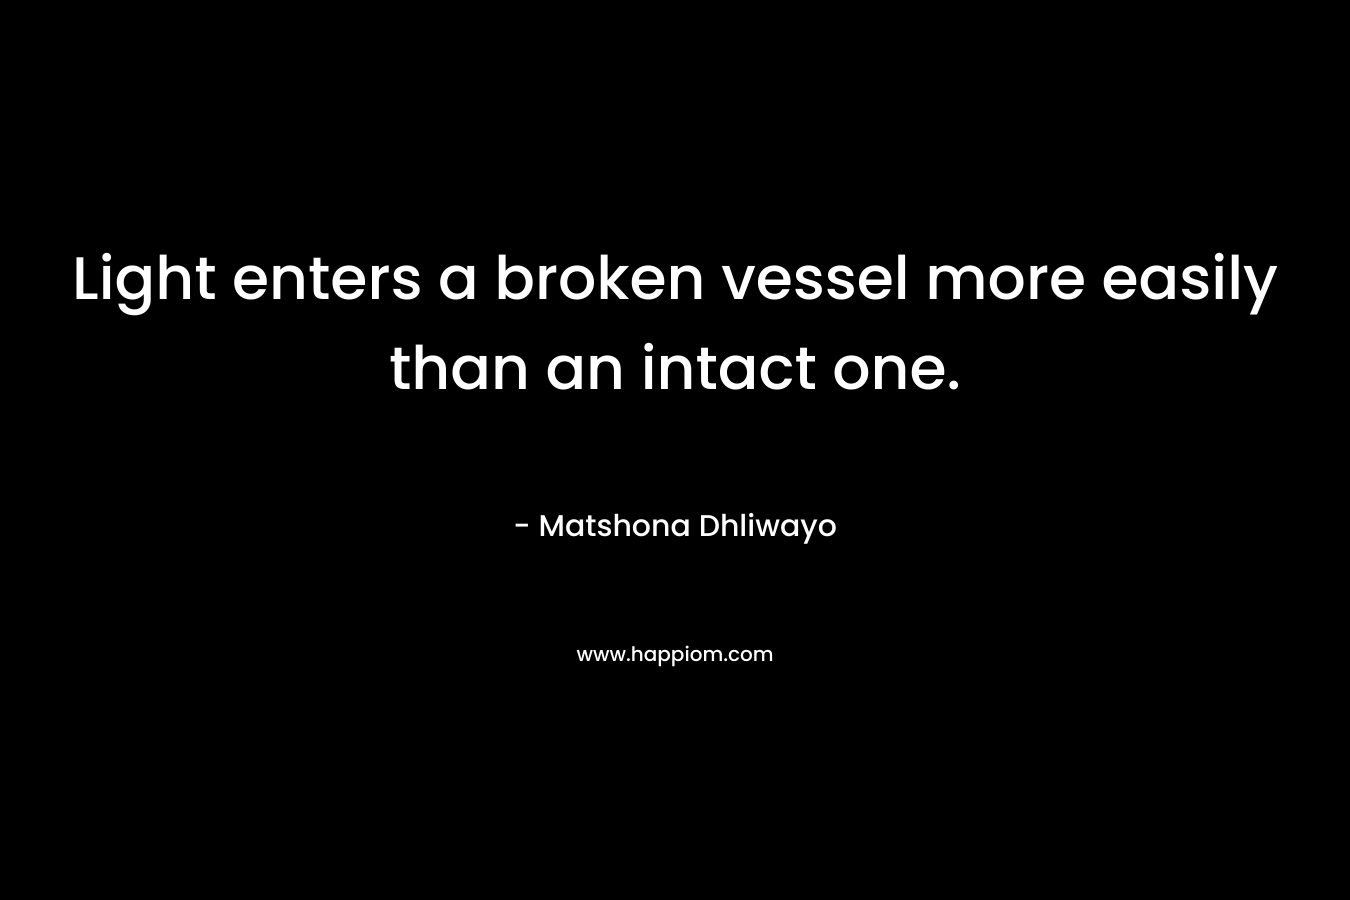 Light enters a broken vessel more easily than an intact one.